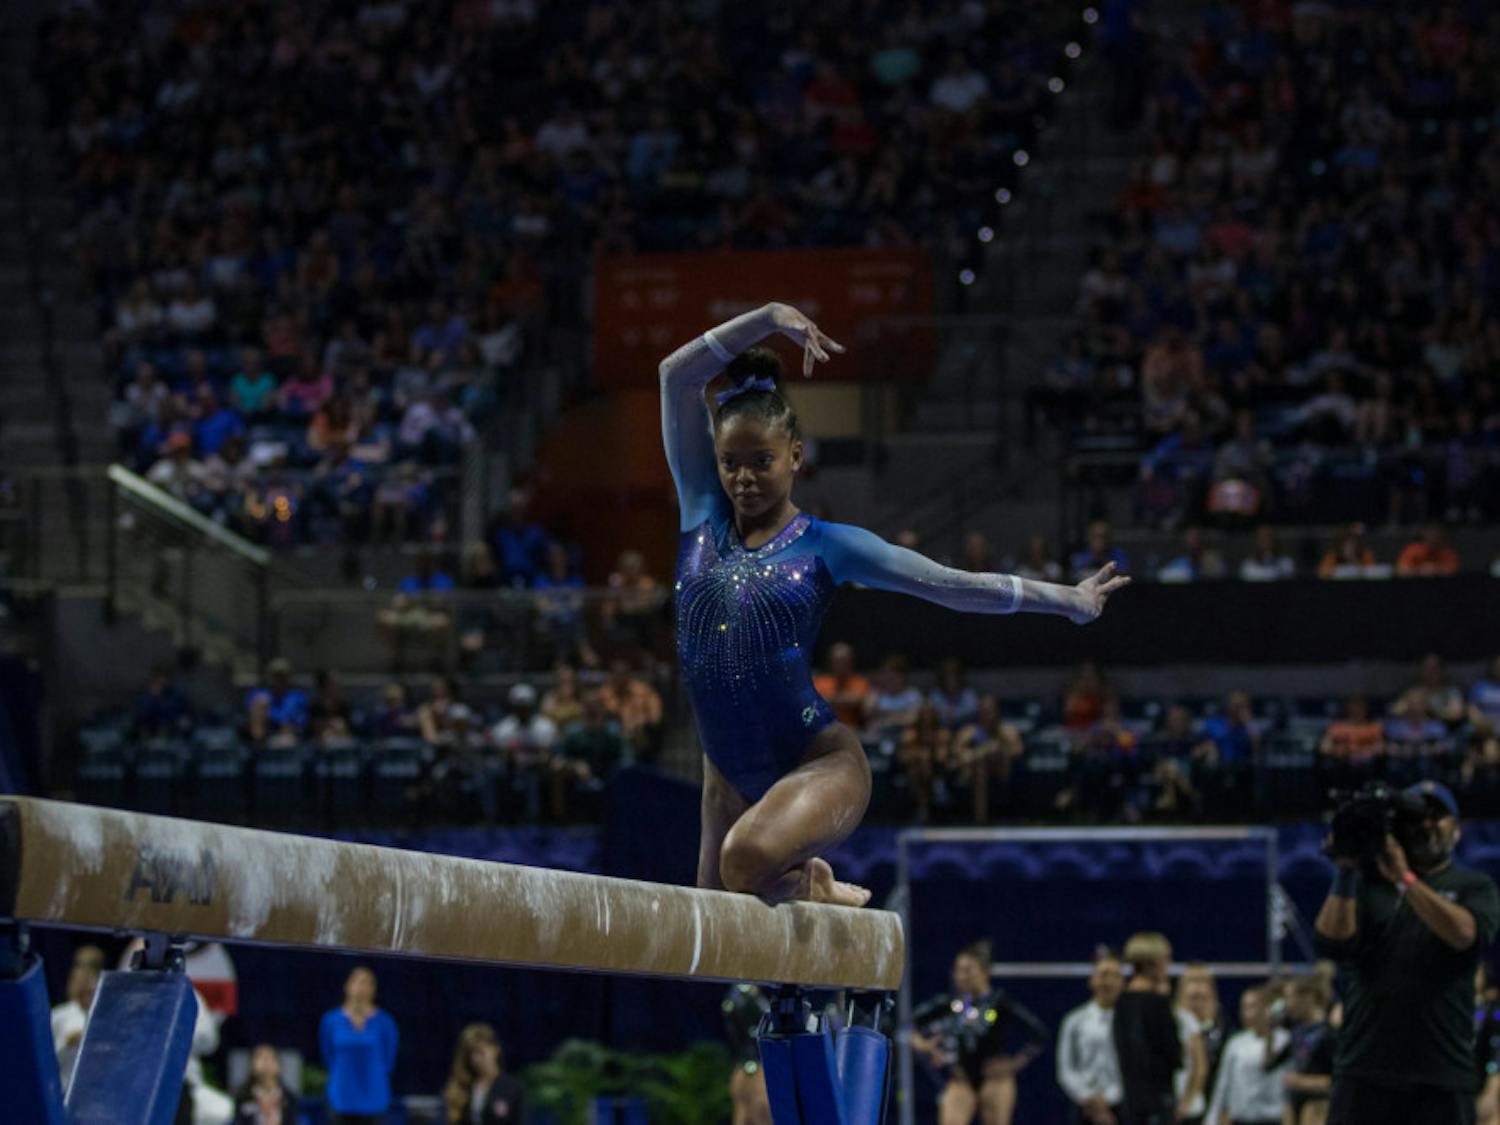 Freshman Trinity Thomas scored a 9.925 on vault and a 9.975 on her floor routine in the Gators regular-season finale win over Penn State on Friday.